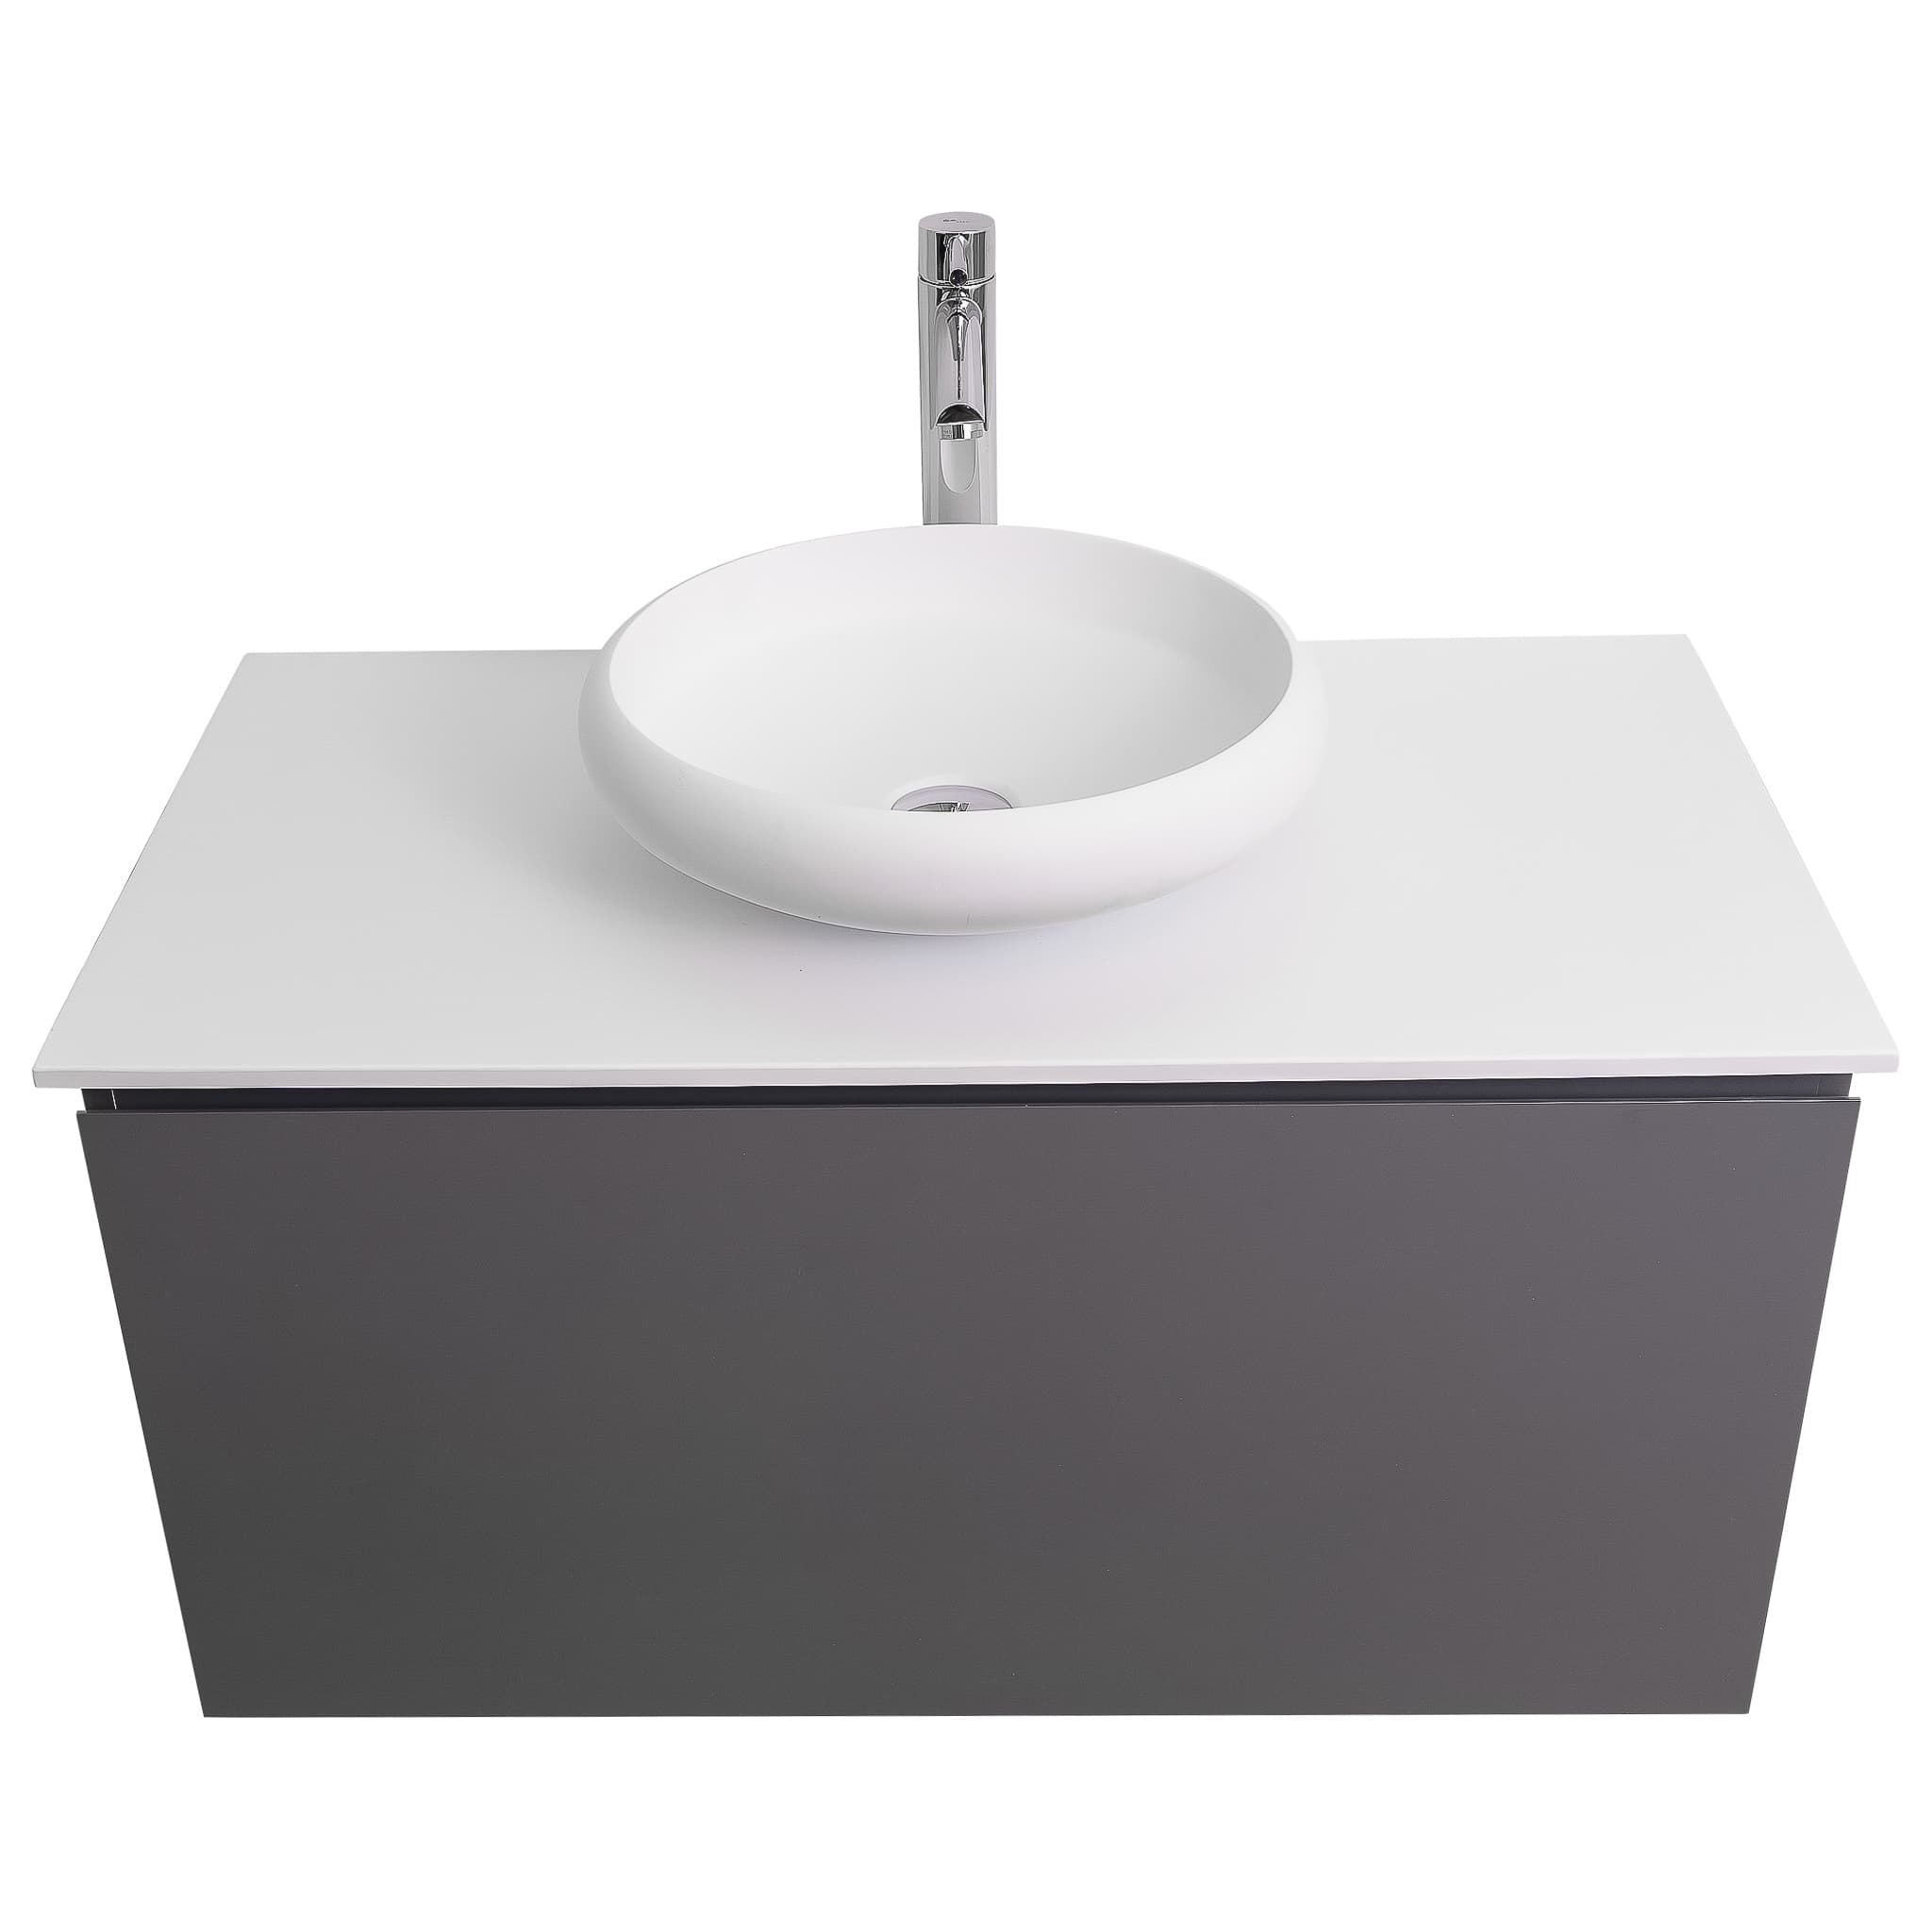 Venice 31.5 Anthracite High Gloss Cabinet, Solid Surface Flat White Counter And Round Solid Surface White Basin 1153, Wall Mounted Modern Vanity Set